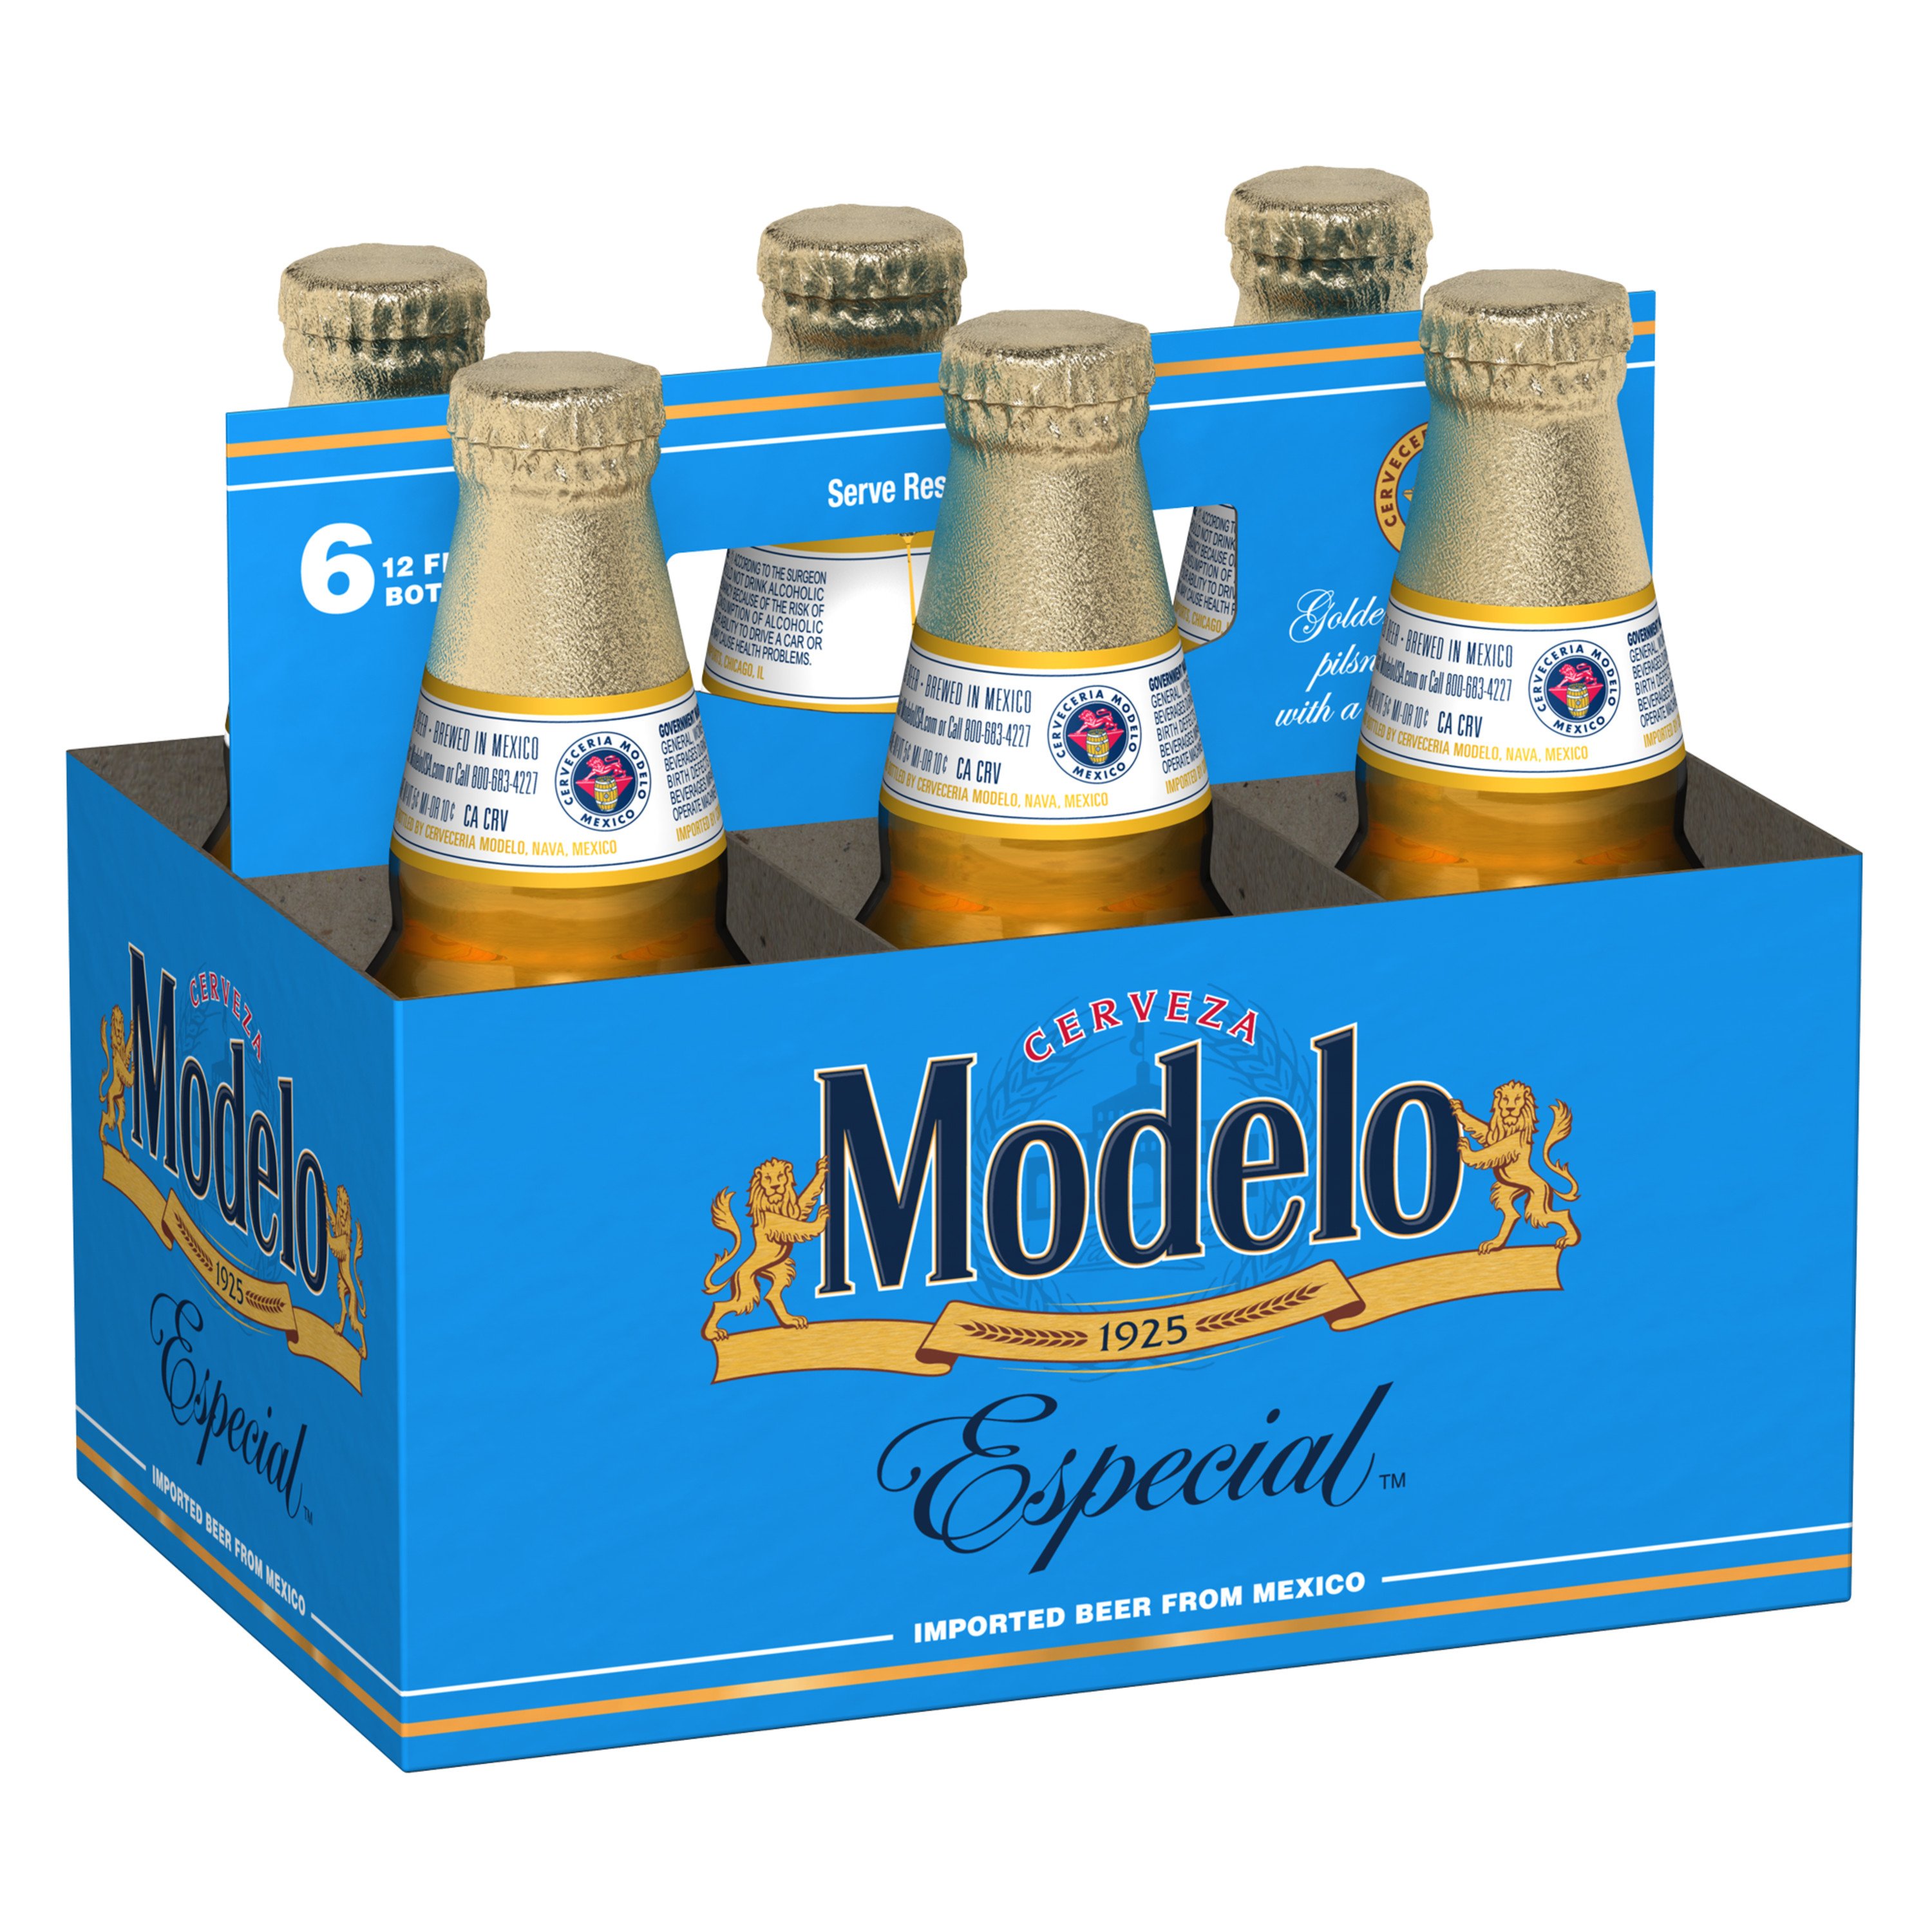 Modelo Especial Mexican Lager Beer 12 oz Bottles - Shop Beer & Wine at H-E-B